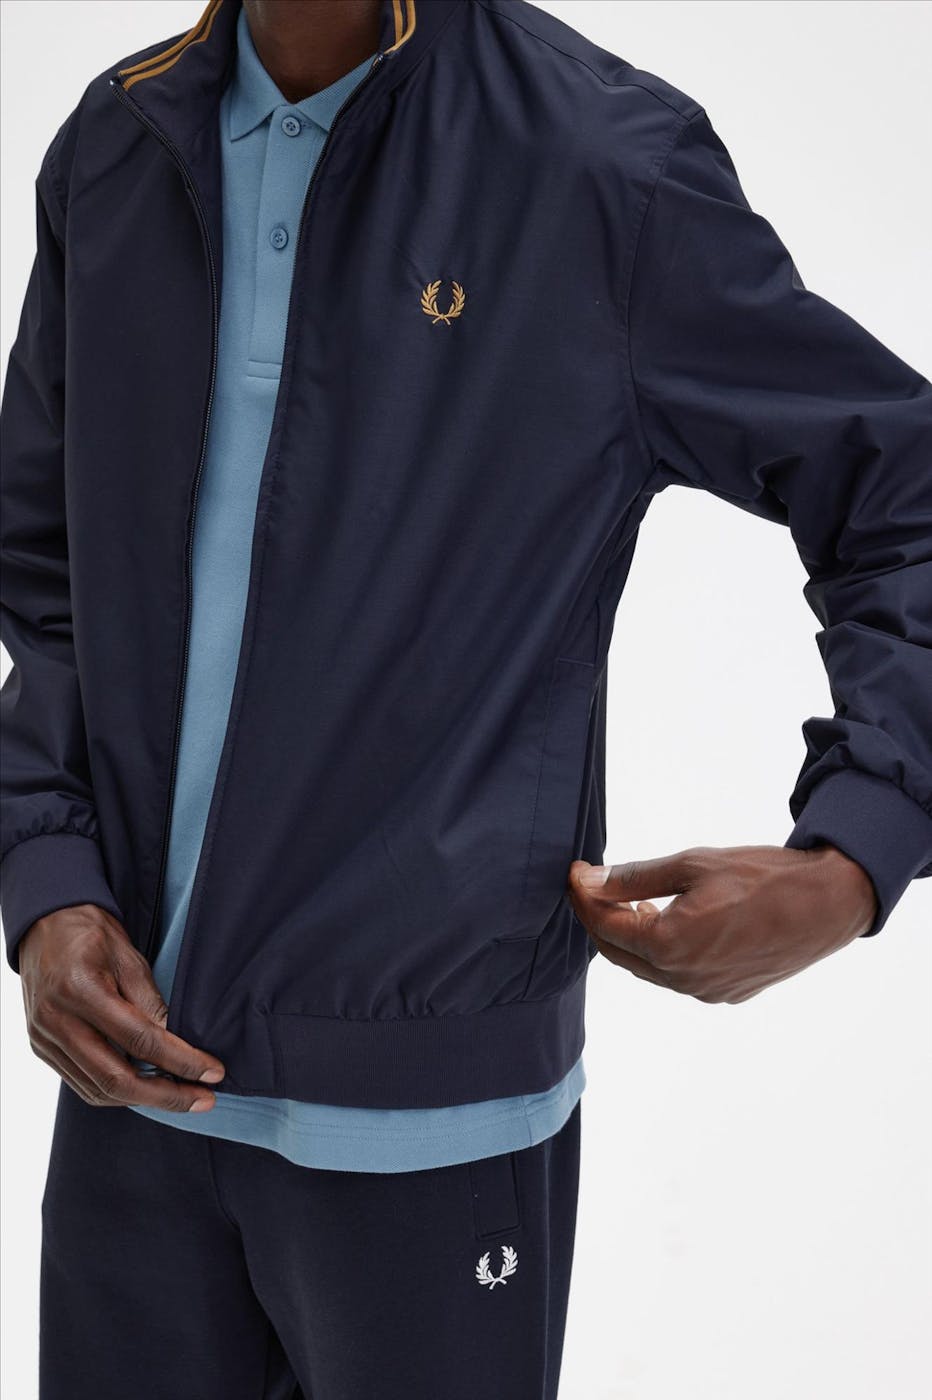 Fred Perry - Donkerblauwe Brentham jas